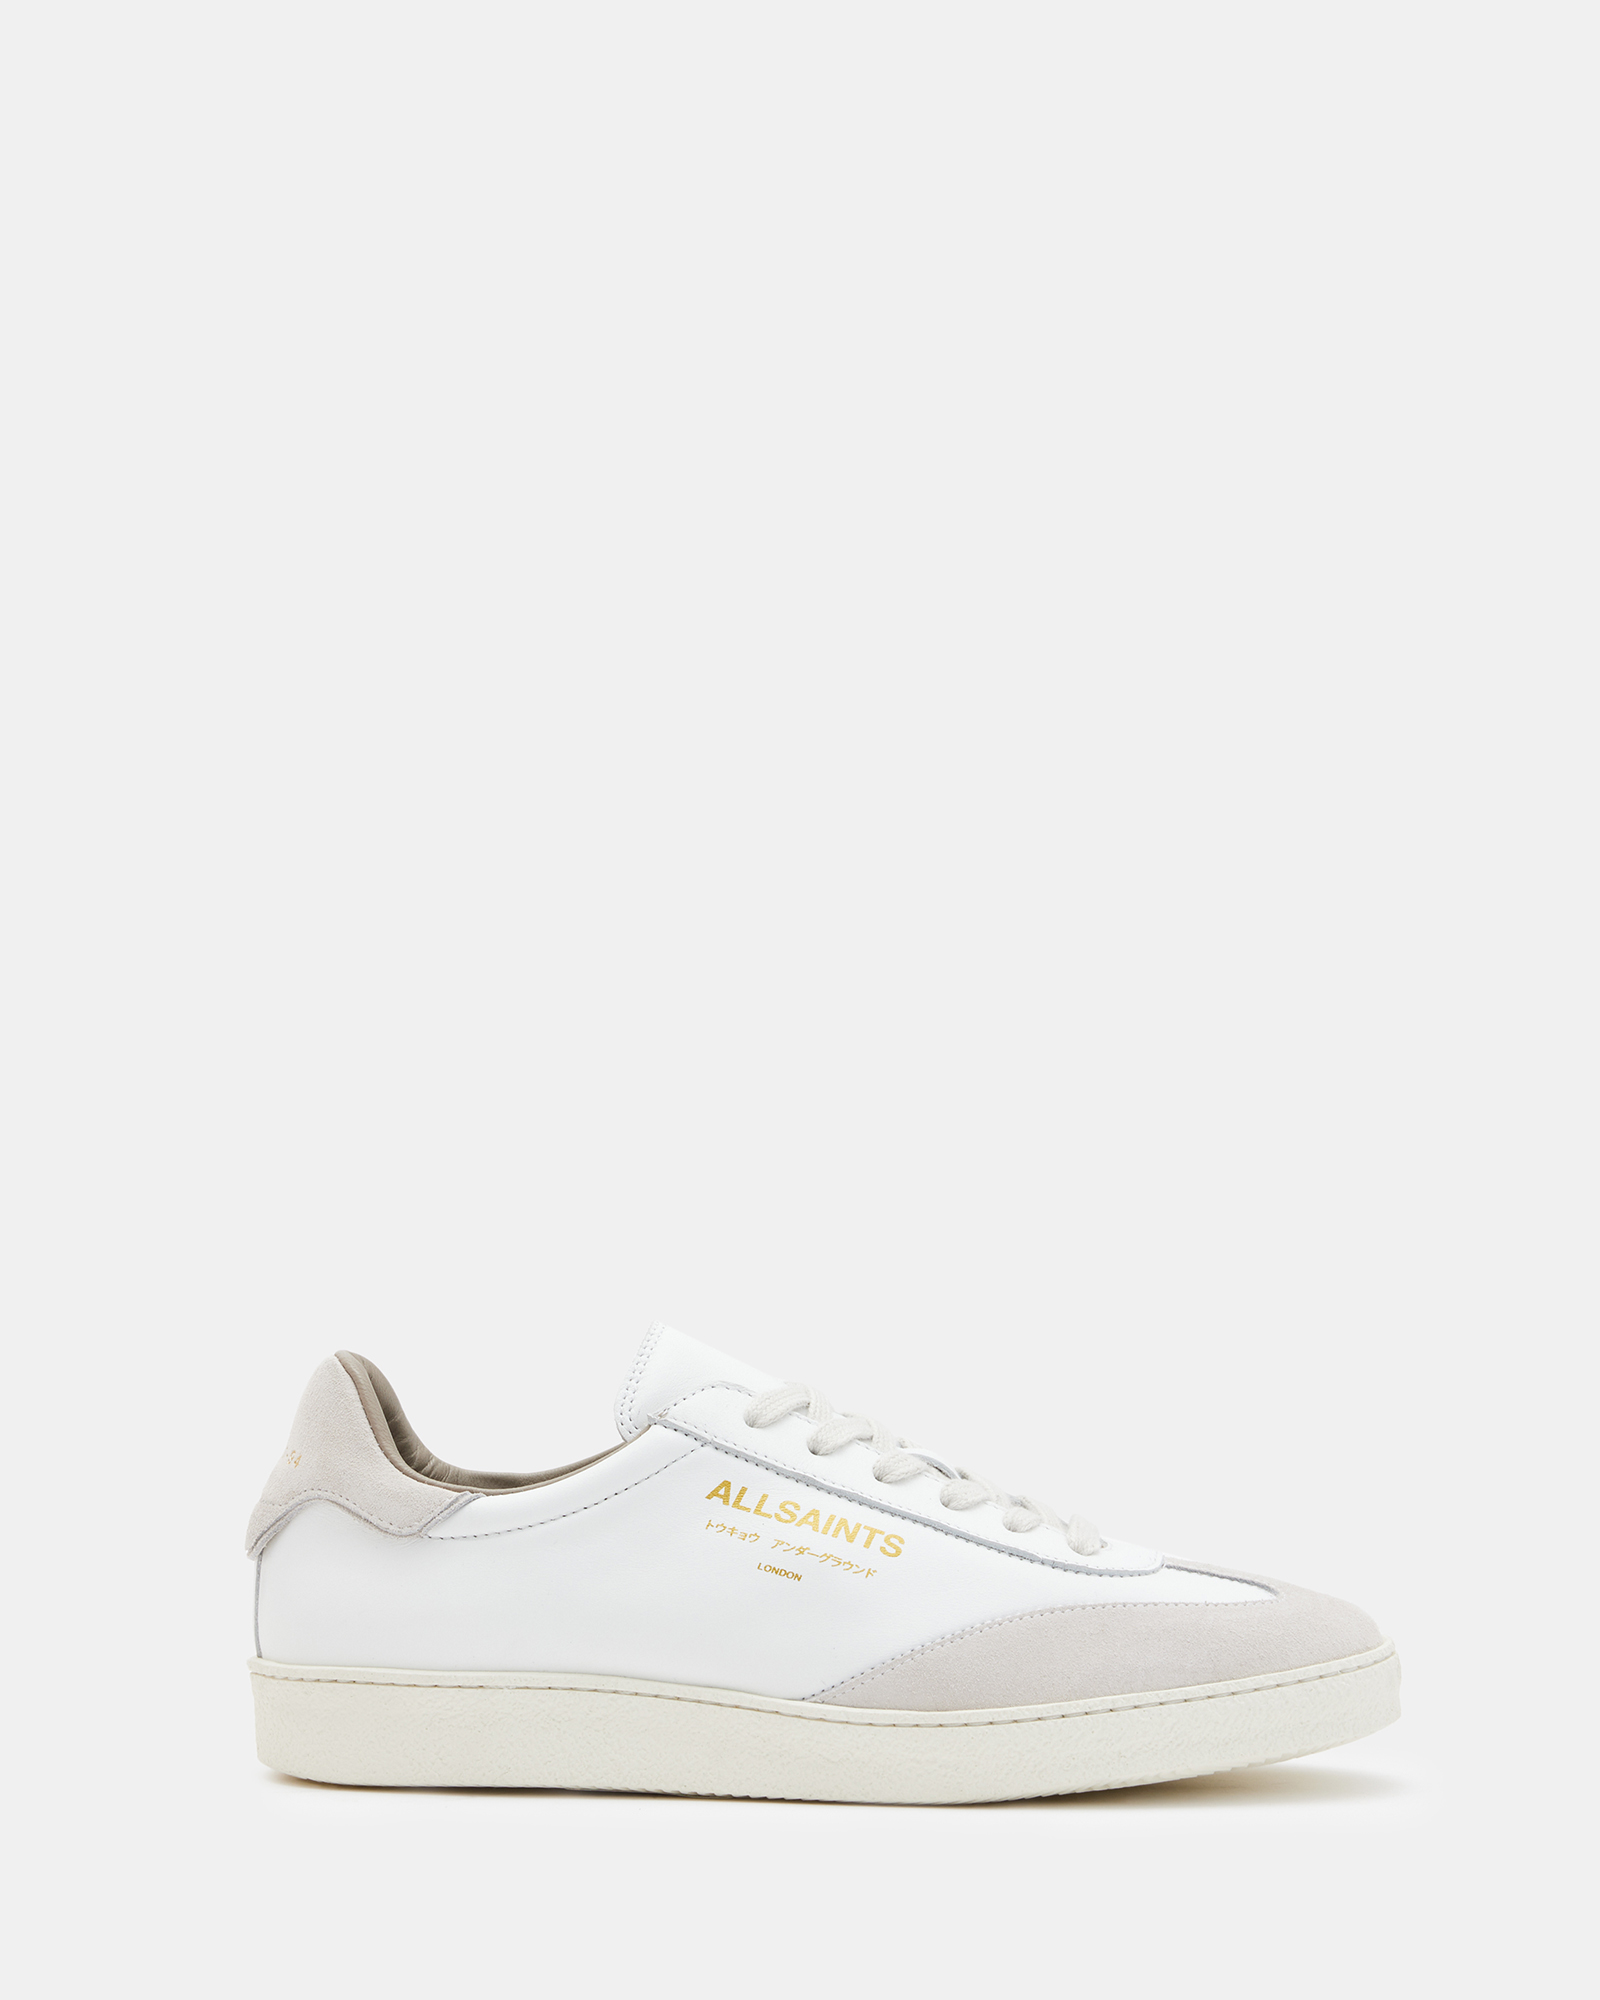 AllSaints Thelma Leather Low Top Trainers,, White